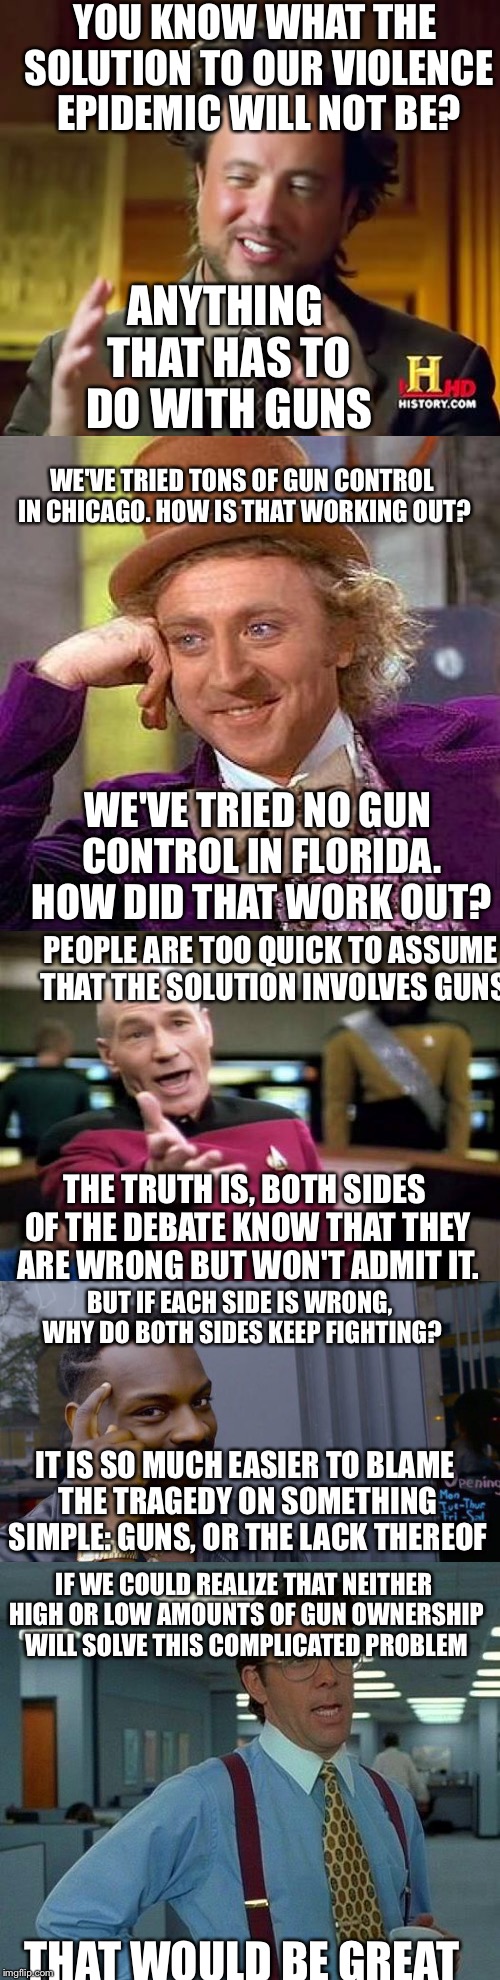 A shower epiphany(an amazing thought I had in the shower) | ANYTHING THAT HAS TO DO WITH GUNS; YOU KNOW WHAT THE SOLUTION TO OUR VIOLENCE EPIDEMIC WILL NOT BE? WE'VE TRIED TONS OF GUN CONTROL IN CHICAGO. HOW IS THAT WORKING OUT? WE'VE TRIED NO GUN CONTROL IN FLORIDA. HOW DID THAT WORK OUT? PEOPLE ARE TOO QUICK TO ASSUME THAT THE SOLUTION INVOLVES GUNS; THE TRUTH IS, BOTH SIDES OF THE DEBATE KNOW THAT THEY ARE WRONG BUT WON'T ADMIT IT. BUT IF EACH SIDE IS WRONG, WHY DO BOTH SIDES KEEP FIGHTING? IT IS SO MUCH EASIER TO BLAME THE TRAGEDY ON SOMETHING SIMPLE: GUNS, OR THE LACK THEREOF; IF WE COULD REALIZE THAT NEITHER HIGH OR LOW AMOUNTS OF GUN OWNERSHIP WILL SOLVE THIS COMPLICATED PROBLEM; THAT WOULD BE GREAT | image tagged in memes,funny,guns,gun control,ancient aliens,creepy condescending wonka | made w/ Imgflip meme maker